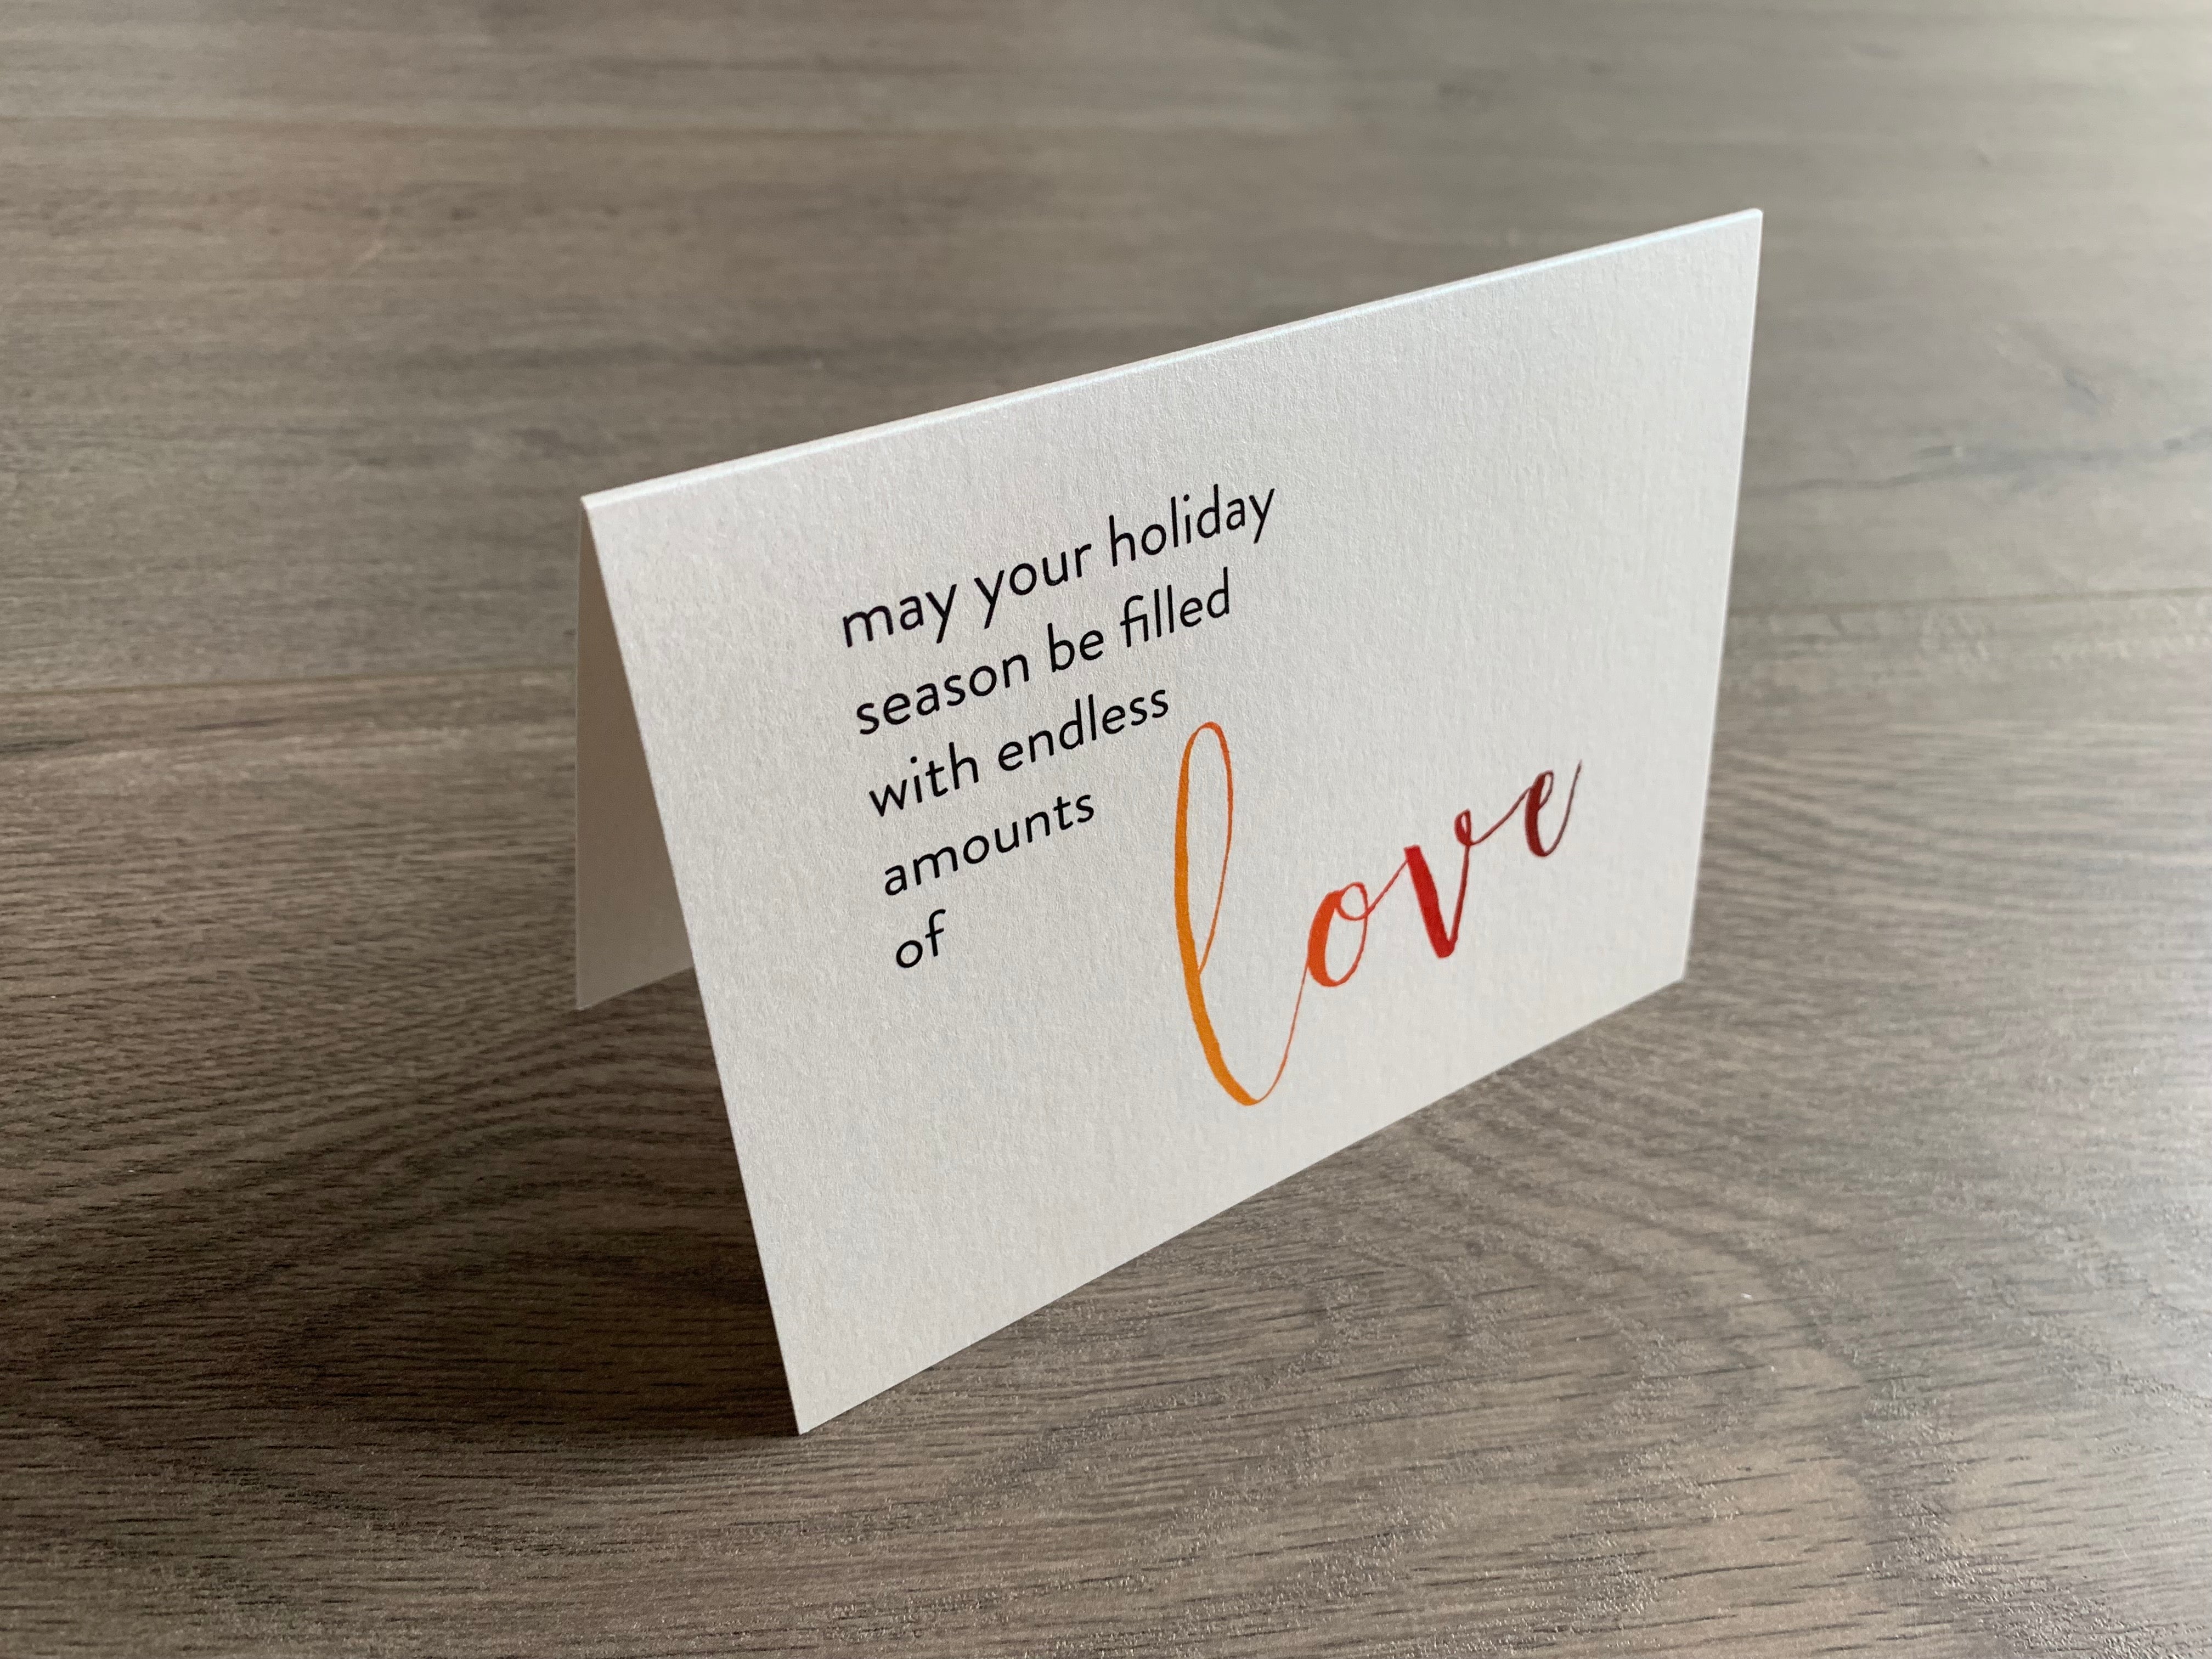 A folded notecard is propped up on a gray wood floor. The notecard is of a cream-colored pearlized paper. The card says, "may your holiday season be filled with endless amounts of love" Meaning of Christmas collection by Stationare.